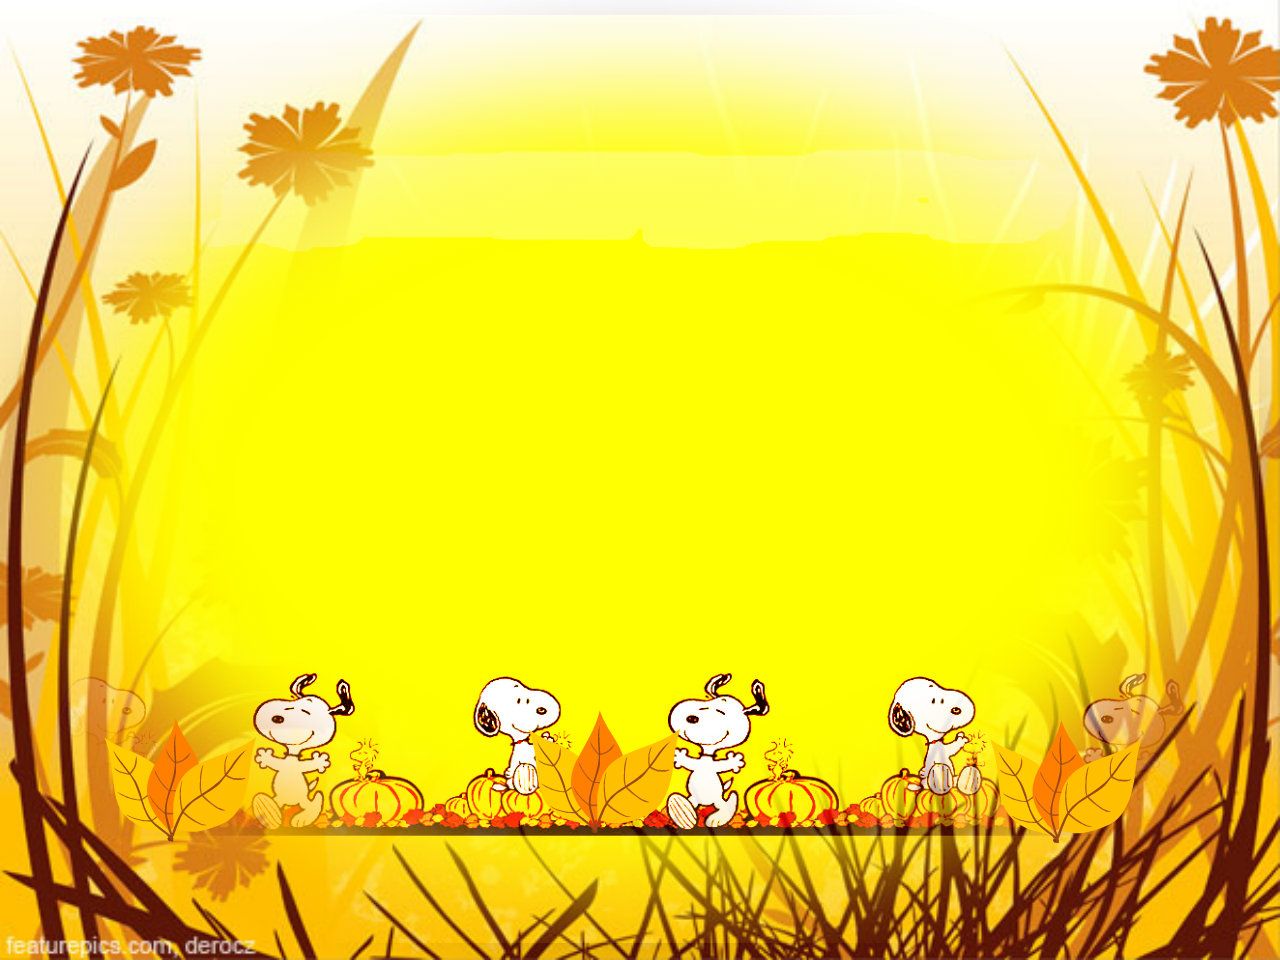 Gallery for - snoopy thanksgiving wallpaper